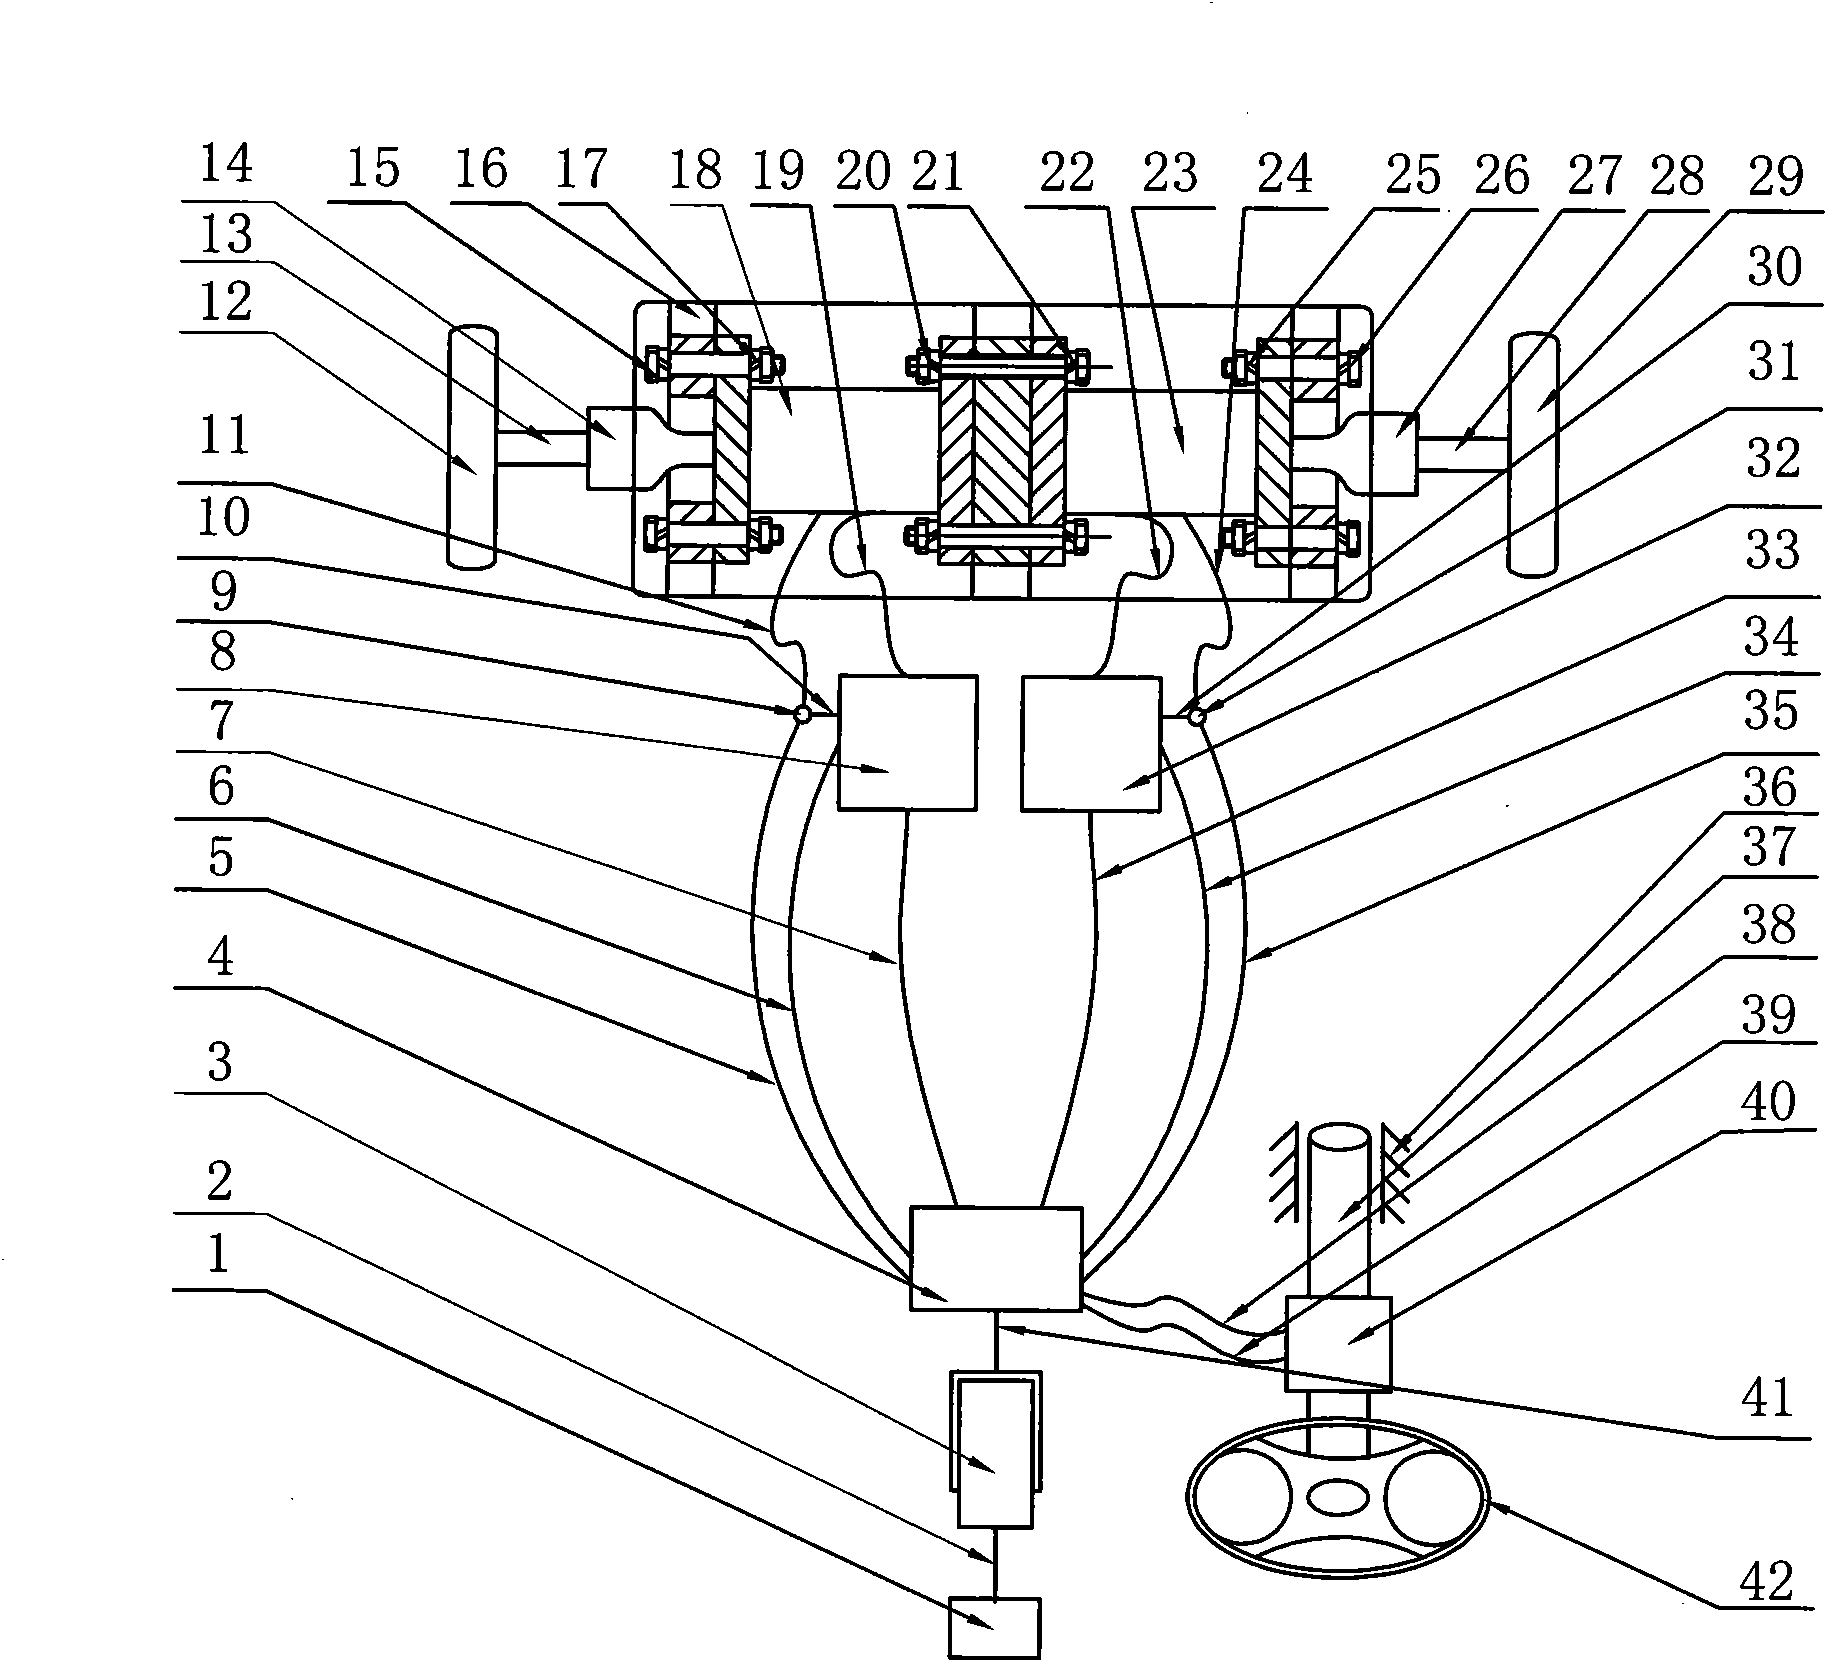 Electronic differential system based on relative slip ratio control